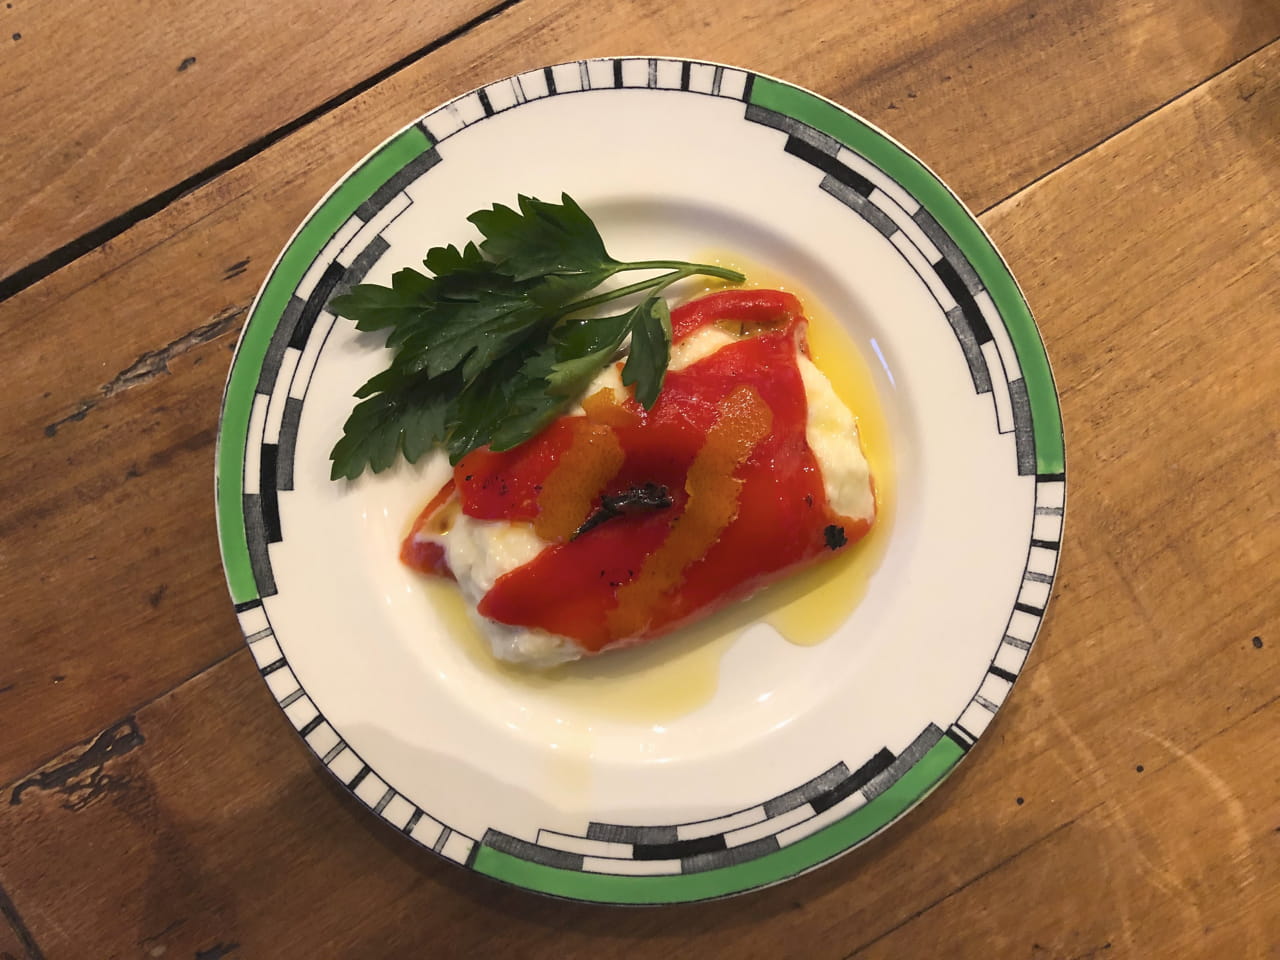 Stuffed piquillo peppers with brandade and Hunter Valley Semillon